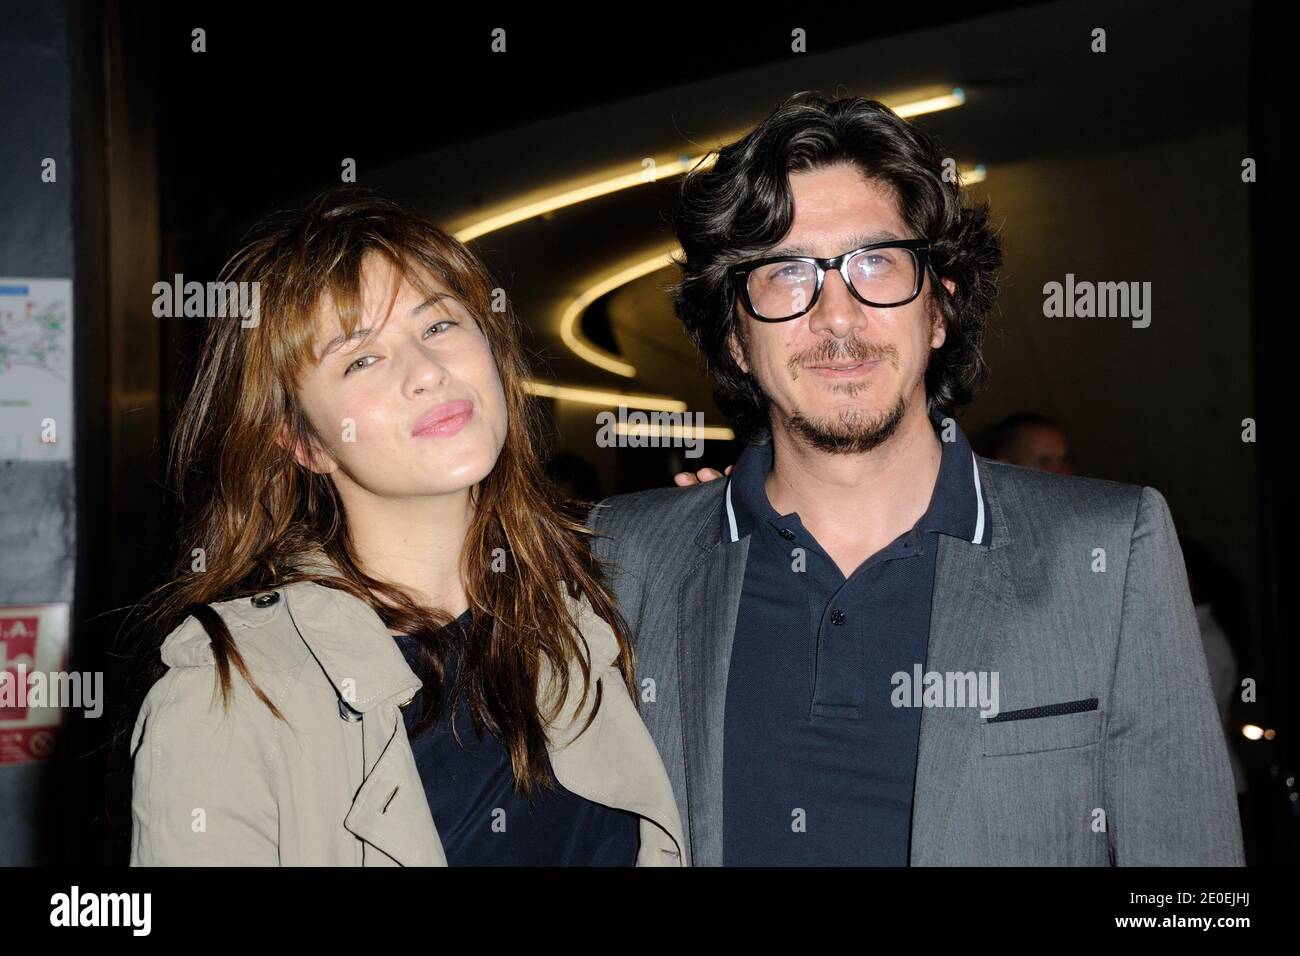 Mylene Jampanoi and Arnaud Lemort attending the premiere of 'Depression et des Potes' at UGC Les Halles theater, in Paris, France on April 26, 2012. Photo by Alban Wyters/ABACAPRESS.COM Stock Photo